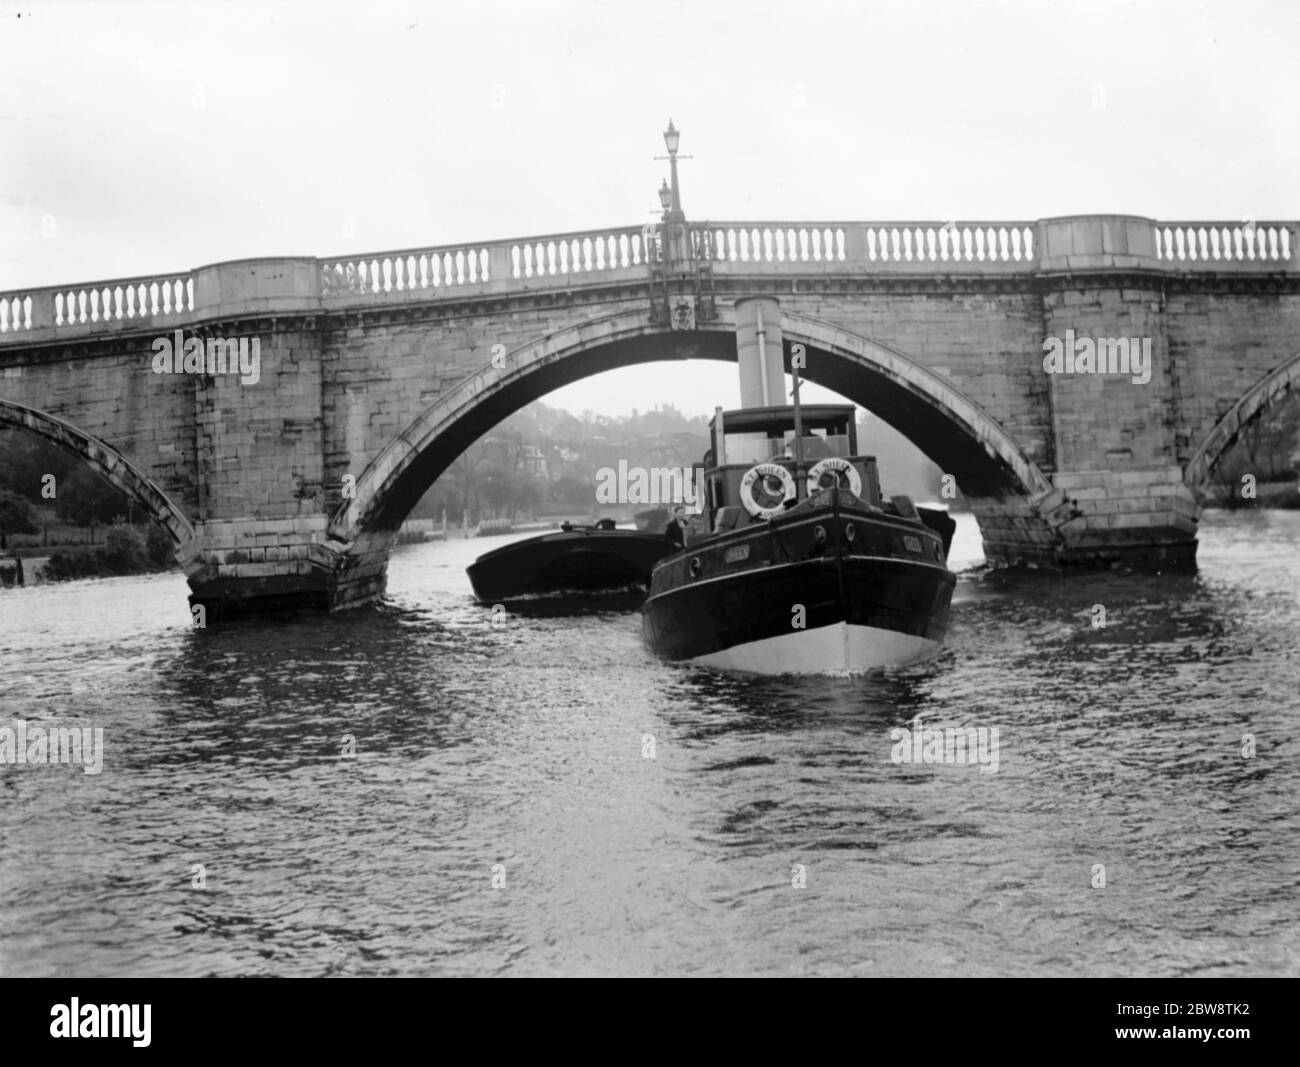 Association of Master Lightermen and Barge Owners have placed an applications for the repair of Richmond Bridge on the river Thames in London . Photos shows a tug towing a laden barge under the Richmond Bridge . 1936 26 October 1936 Stock Photo